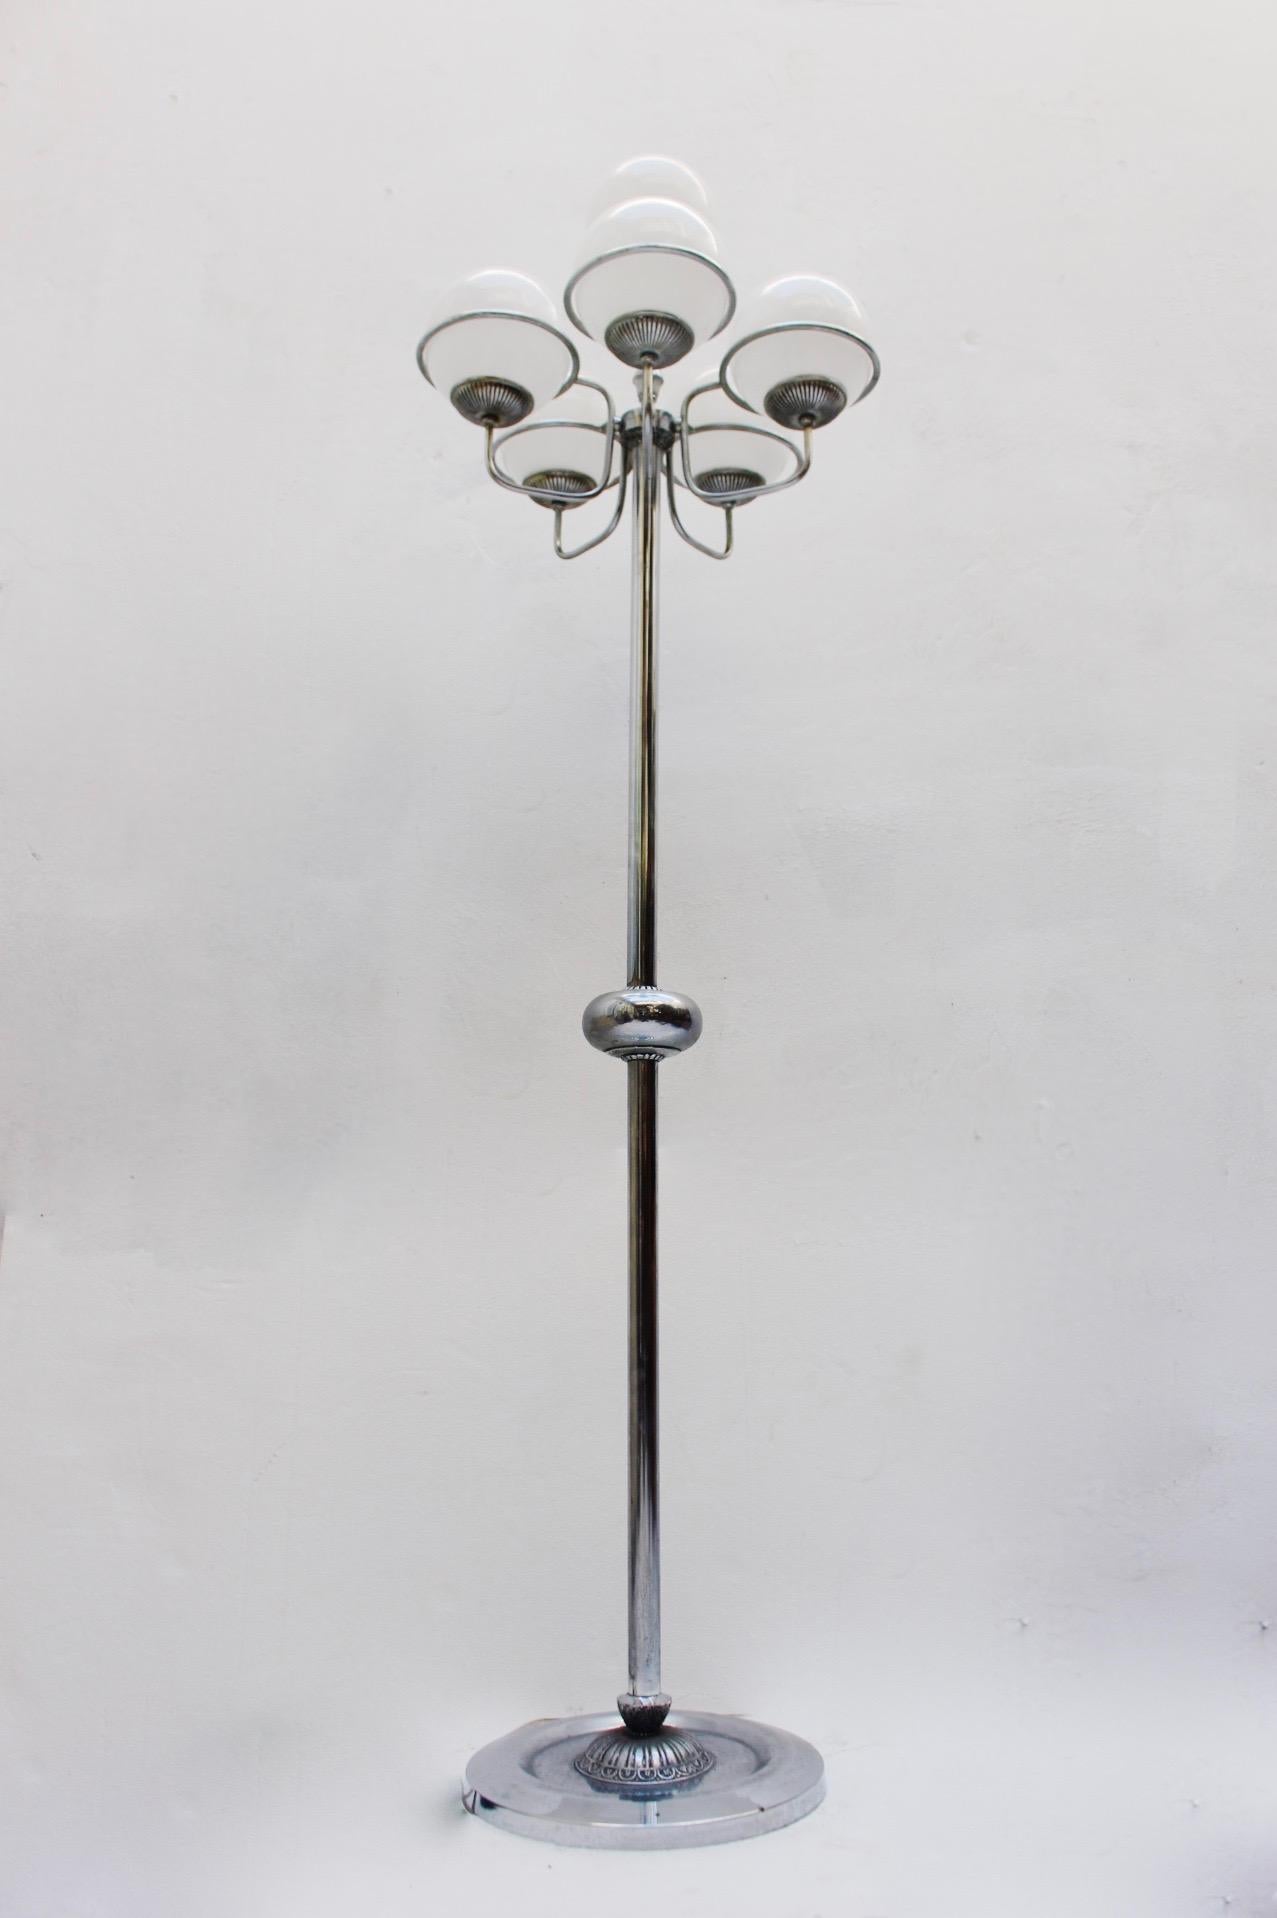 Midcentury Space Age chrome 6-lights floor lamp, 1960s.
Metal structure features signs of wear. Two different floor switches that allows you to use one, five or six lights at a time.
 